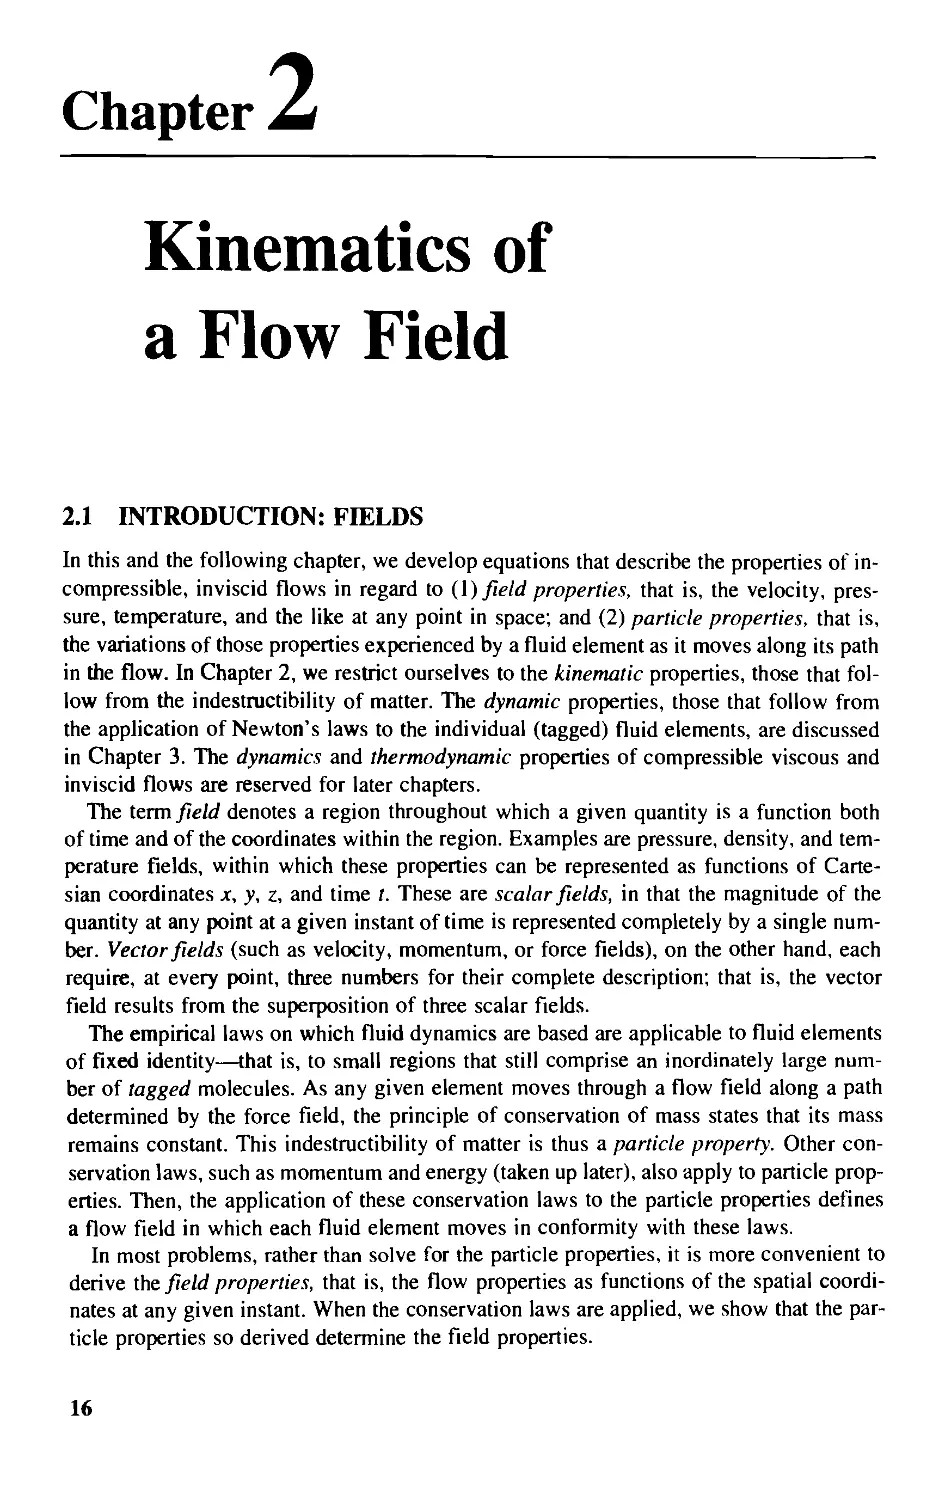 Chapter 2 - Kinematics of a Flow Field